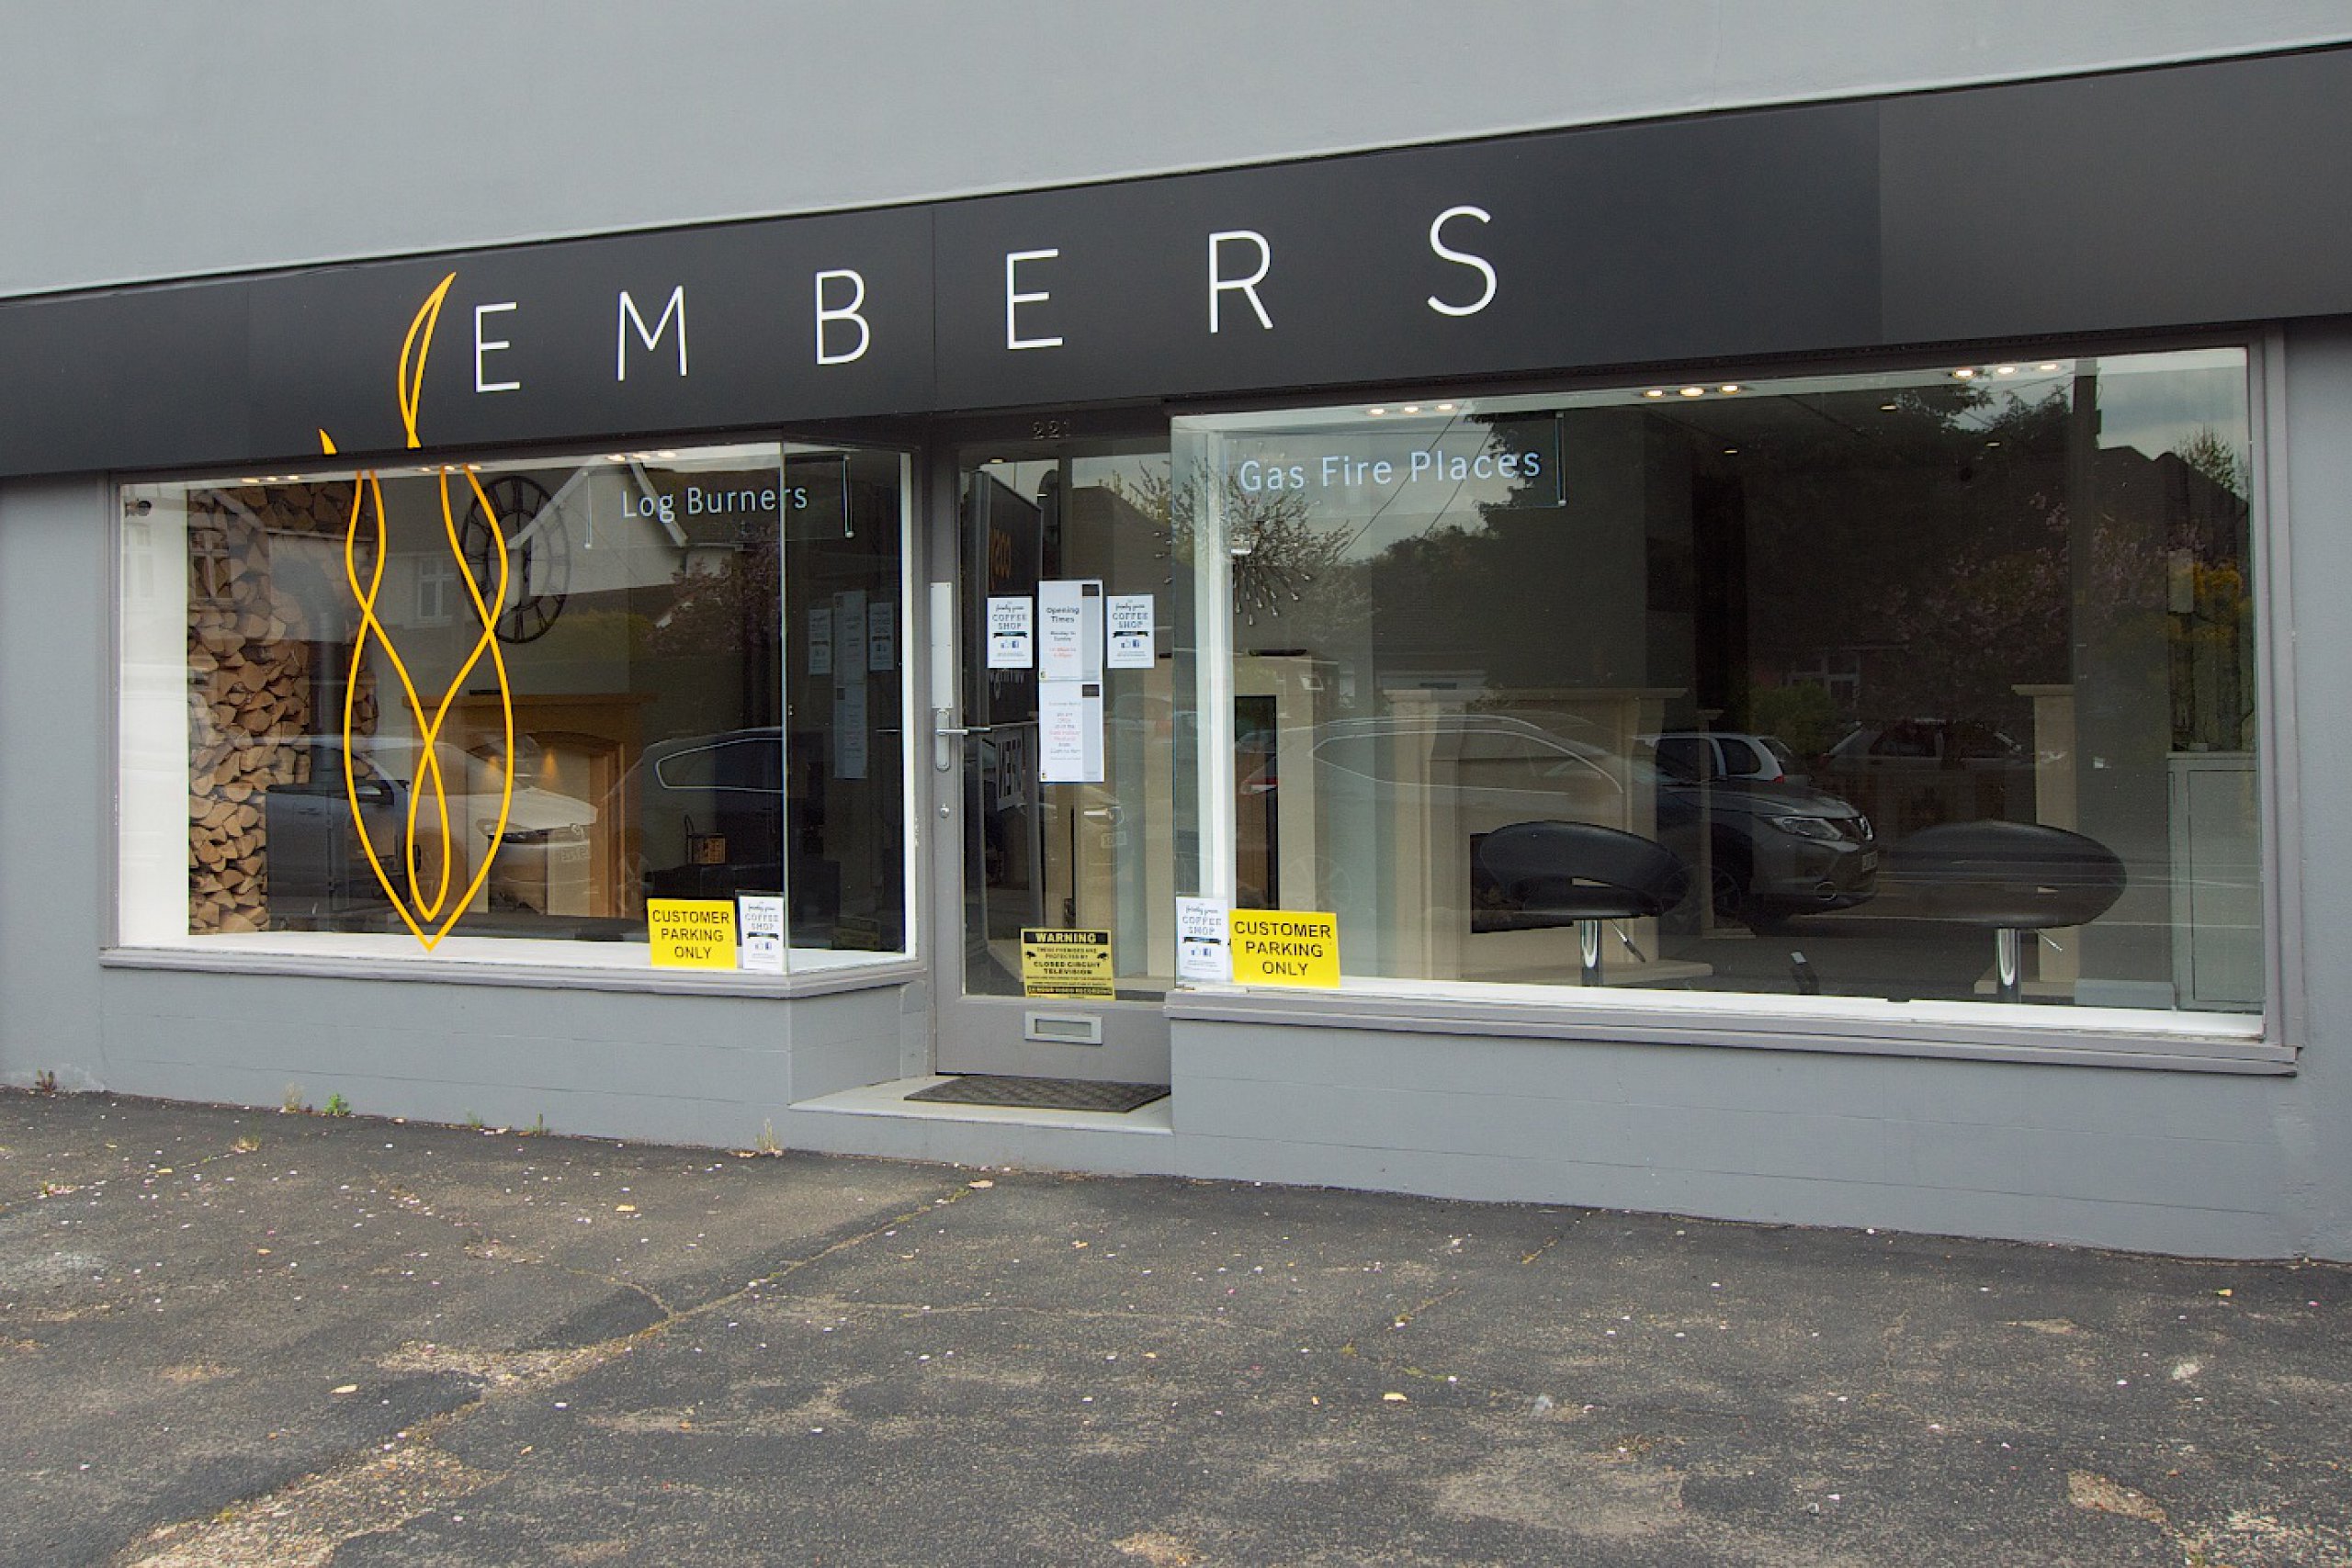 Embers Fireplace showroom in Frimley Green, Camberley, Surrey